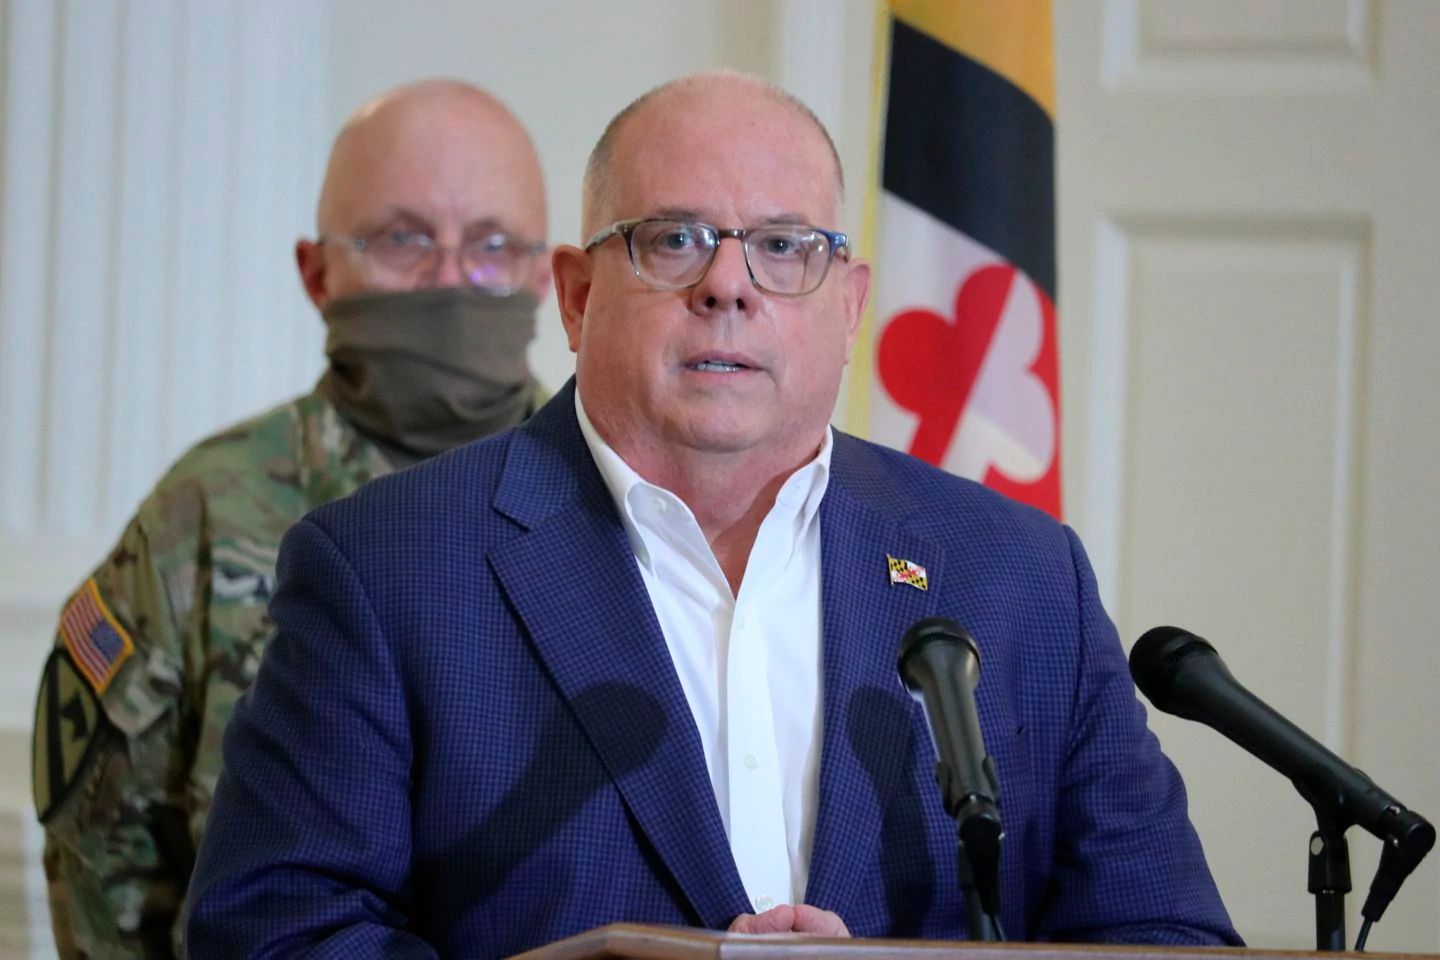 Maryland Gov. Hogan resists pressure to reopen quickly as coronavirus deaths, infections rise throughout Washington region